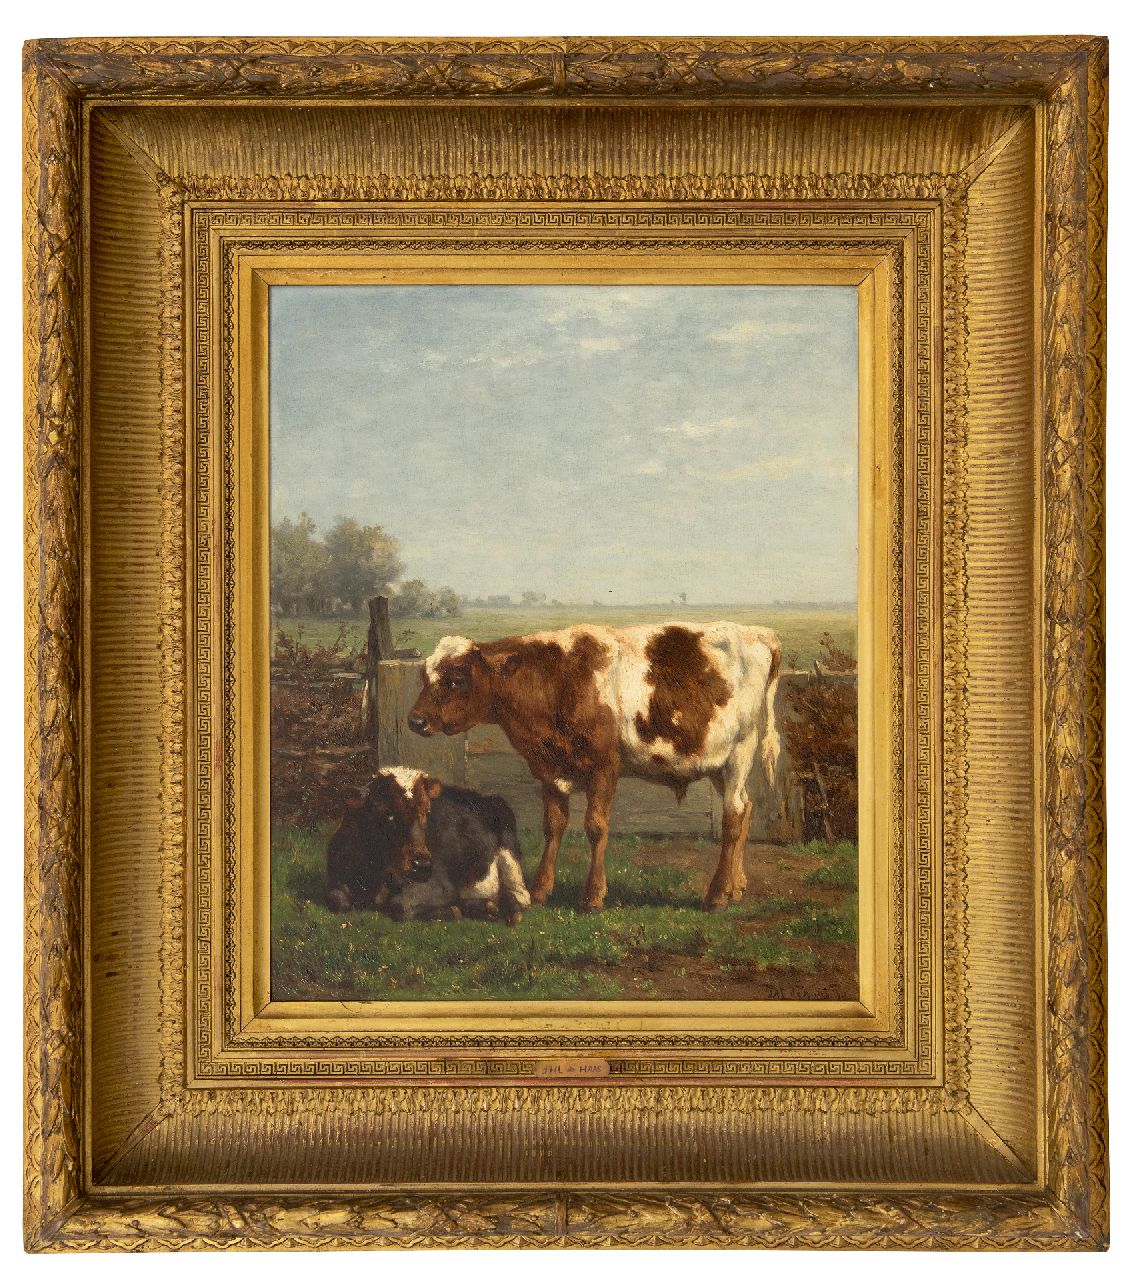 Haas J.H.L. de | Johannes Hubertus Leonardus de Haas | Paintings offered for sale | Two young cows by a fence, oil on panel 43.1 x 35.3 cm, signed l.r. and dated '70